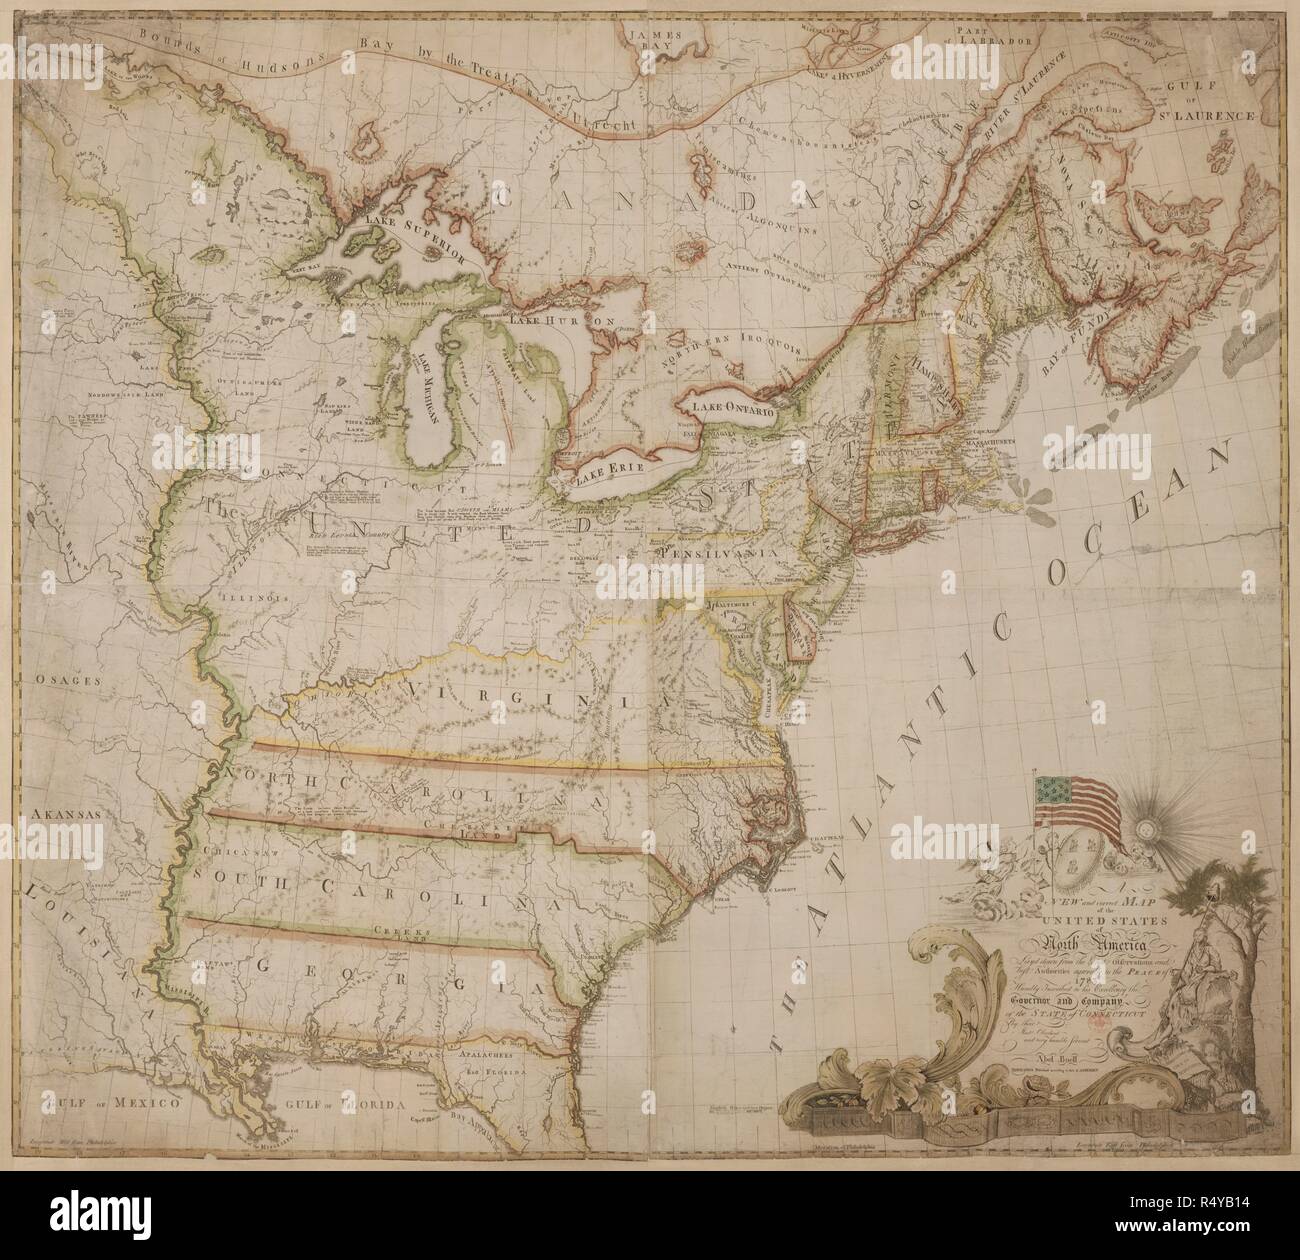 A New and Correct Map of the United States of North America. A New and Correct Map of the United States of North America; layd down agreeable to the Peace of 1783. Newhaven (Conn.), (1783?). Source: Maps.*71490.(150). Stock Photo